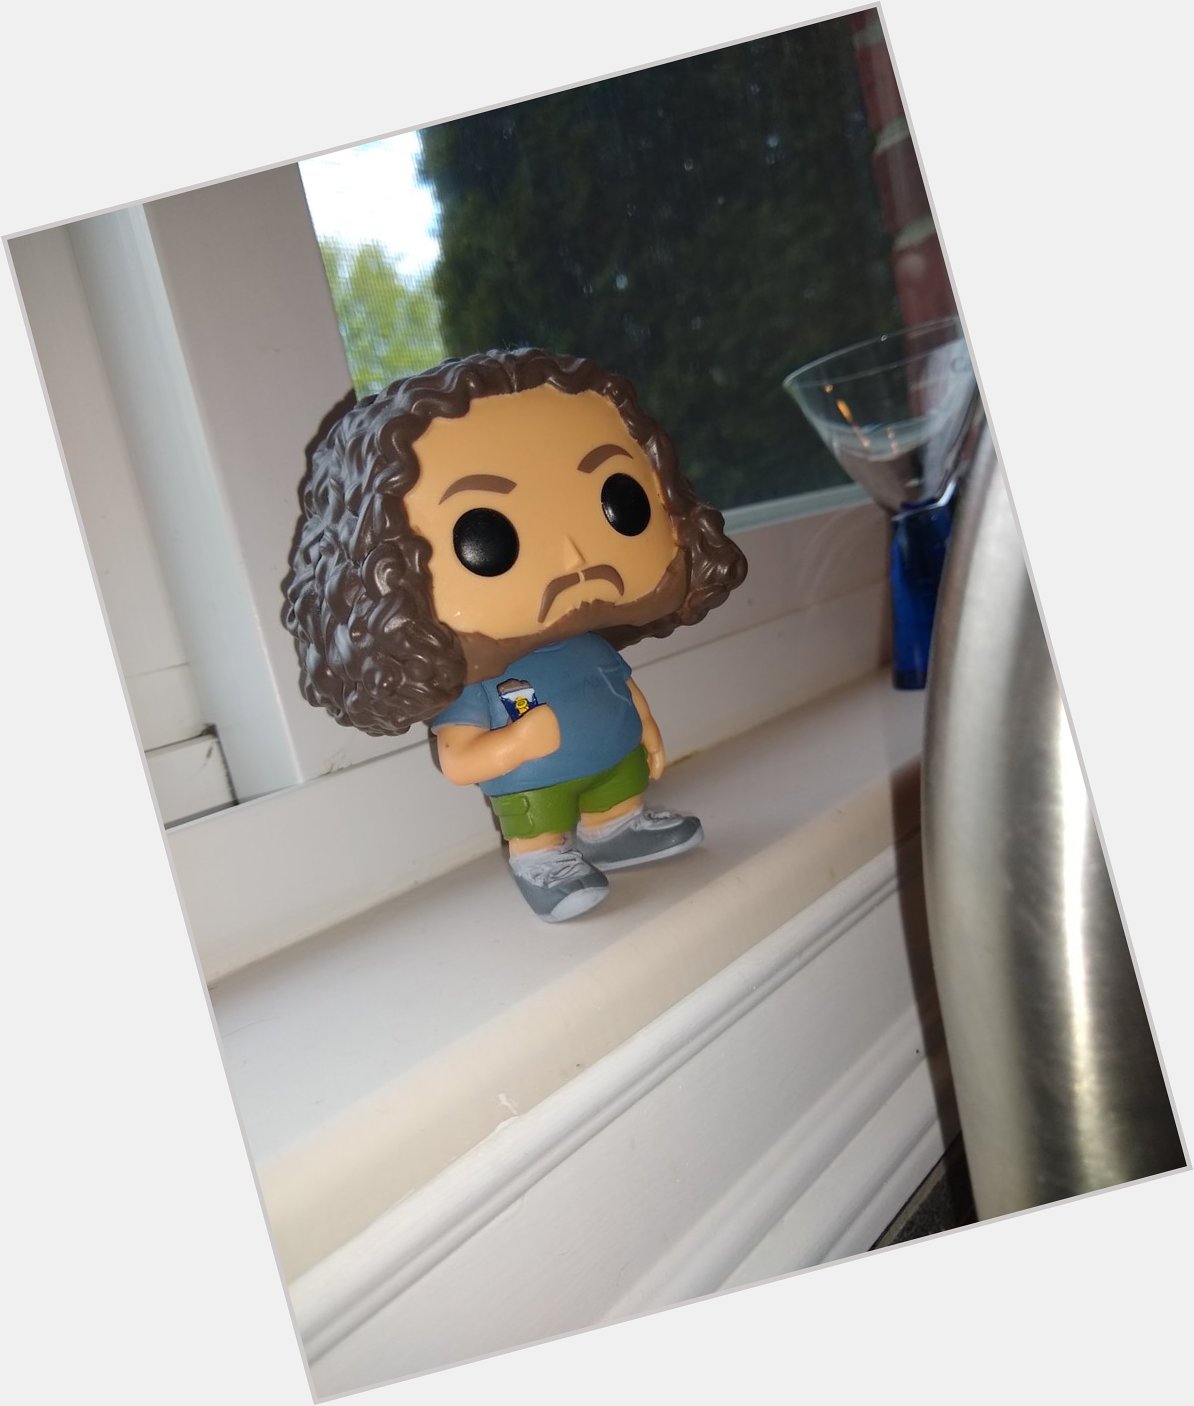 Happy birthday to Jorge Garcia.
Here he is on our kitchen window sill.  